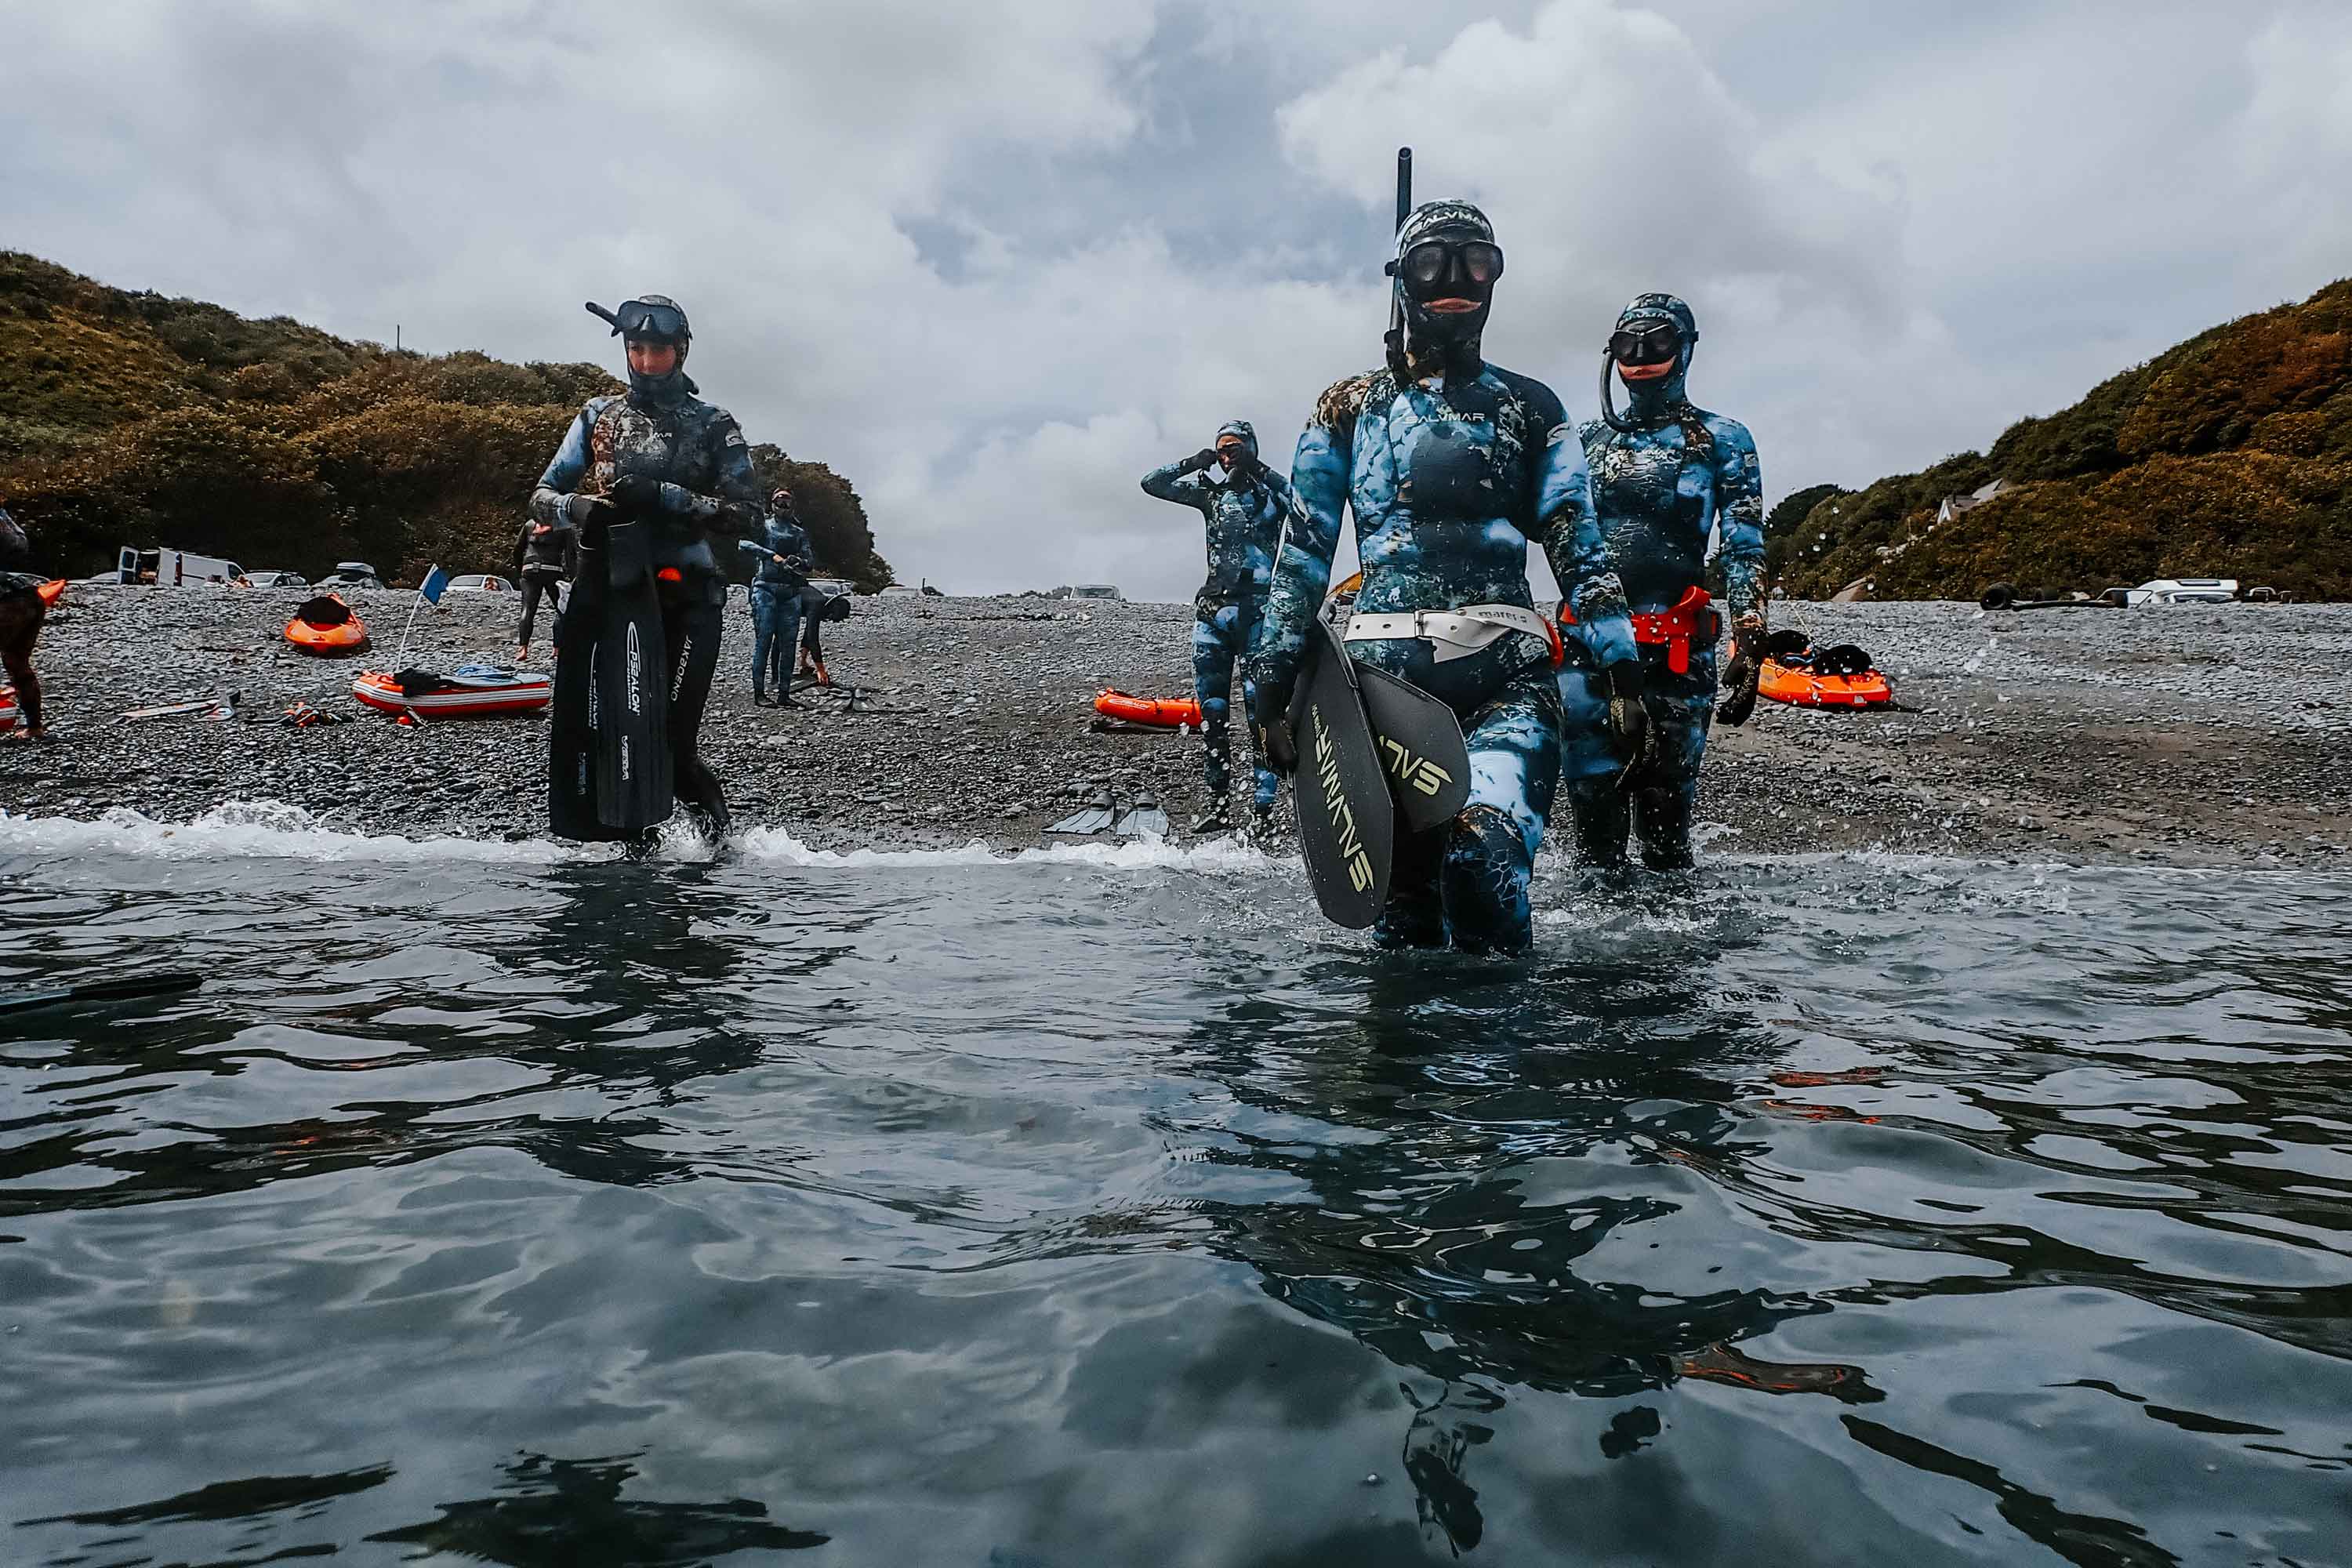 A group of people walking into water from a rocky beach, wearing diving and scuba gear